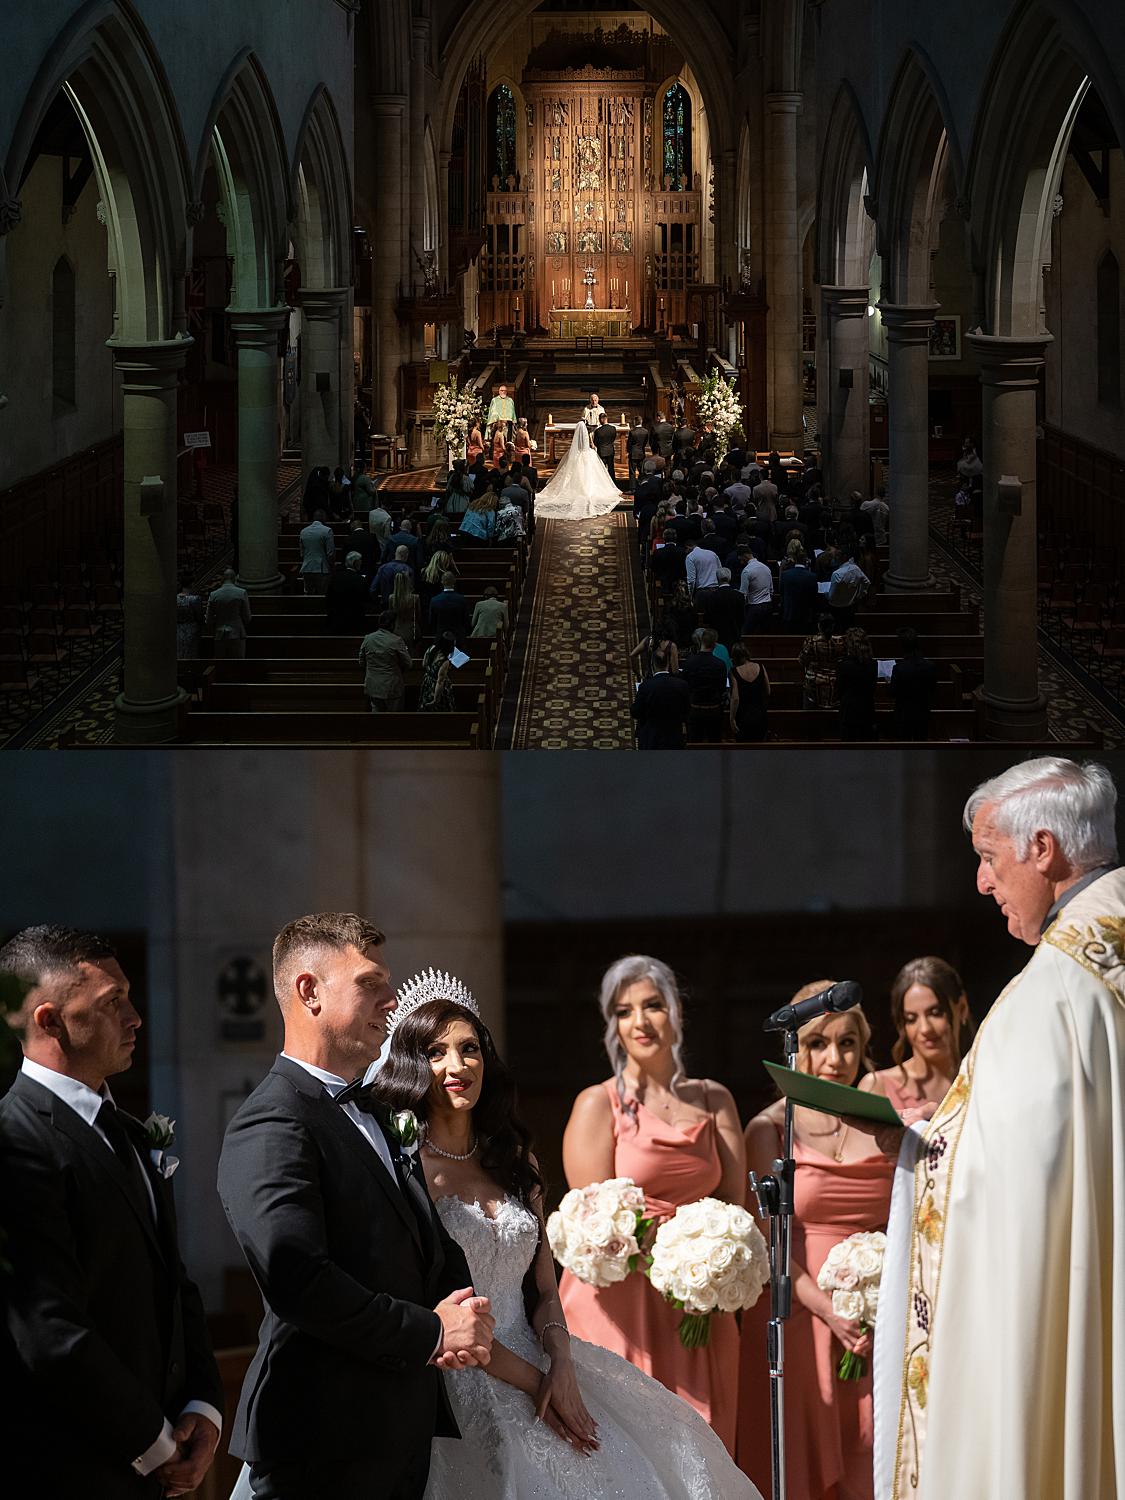 Melbourne wedding photography, church wedding ceremony cathedral